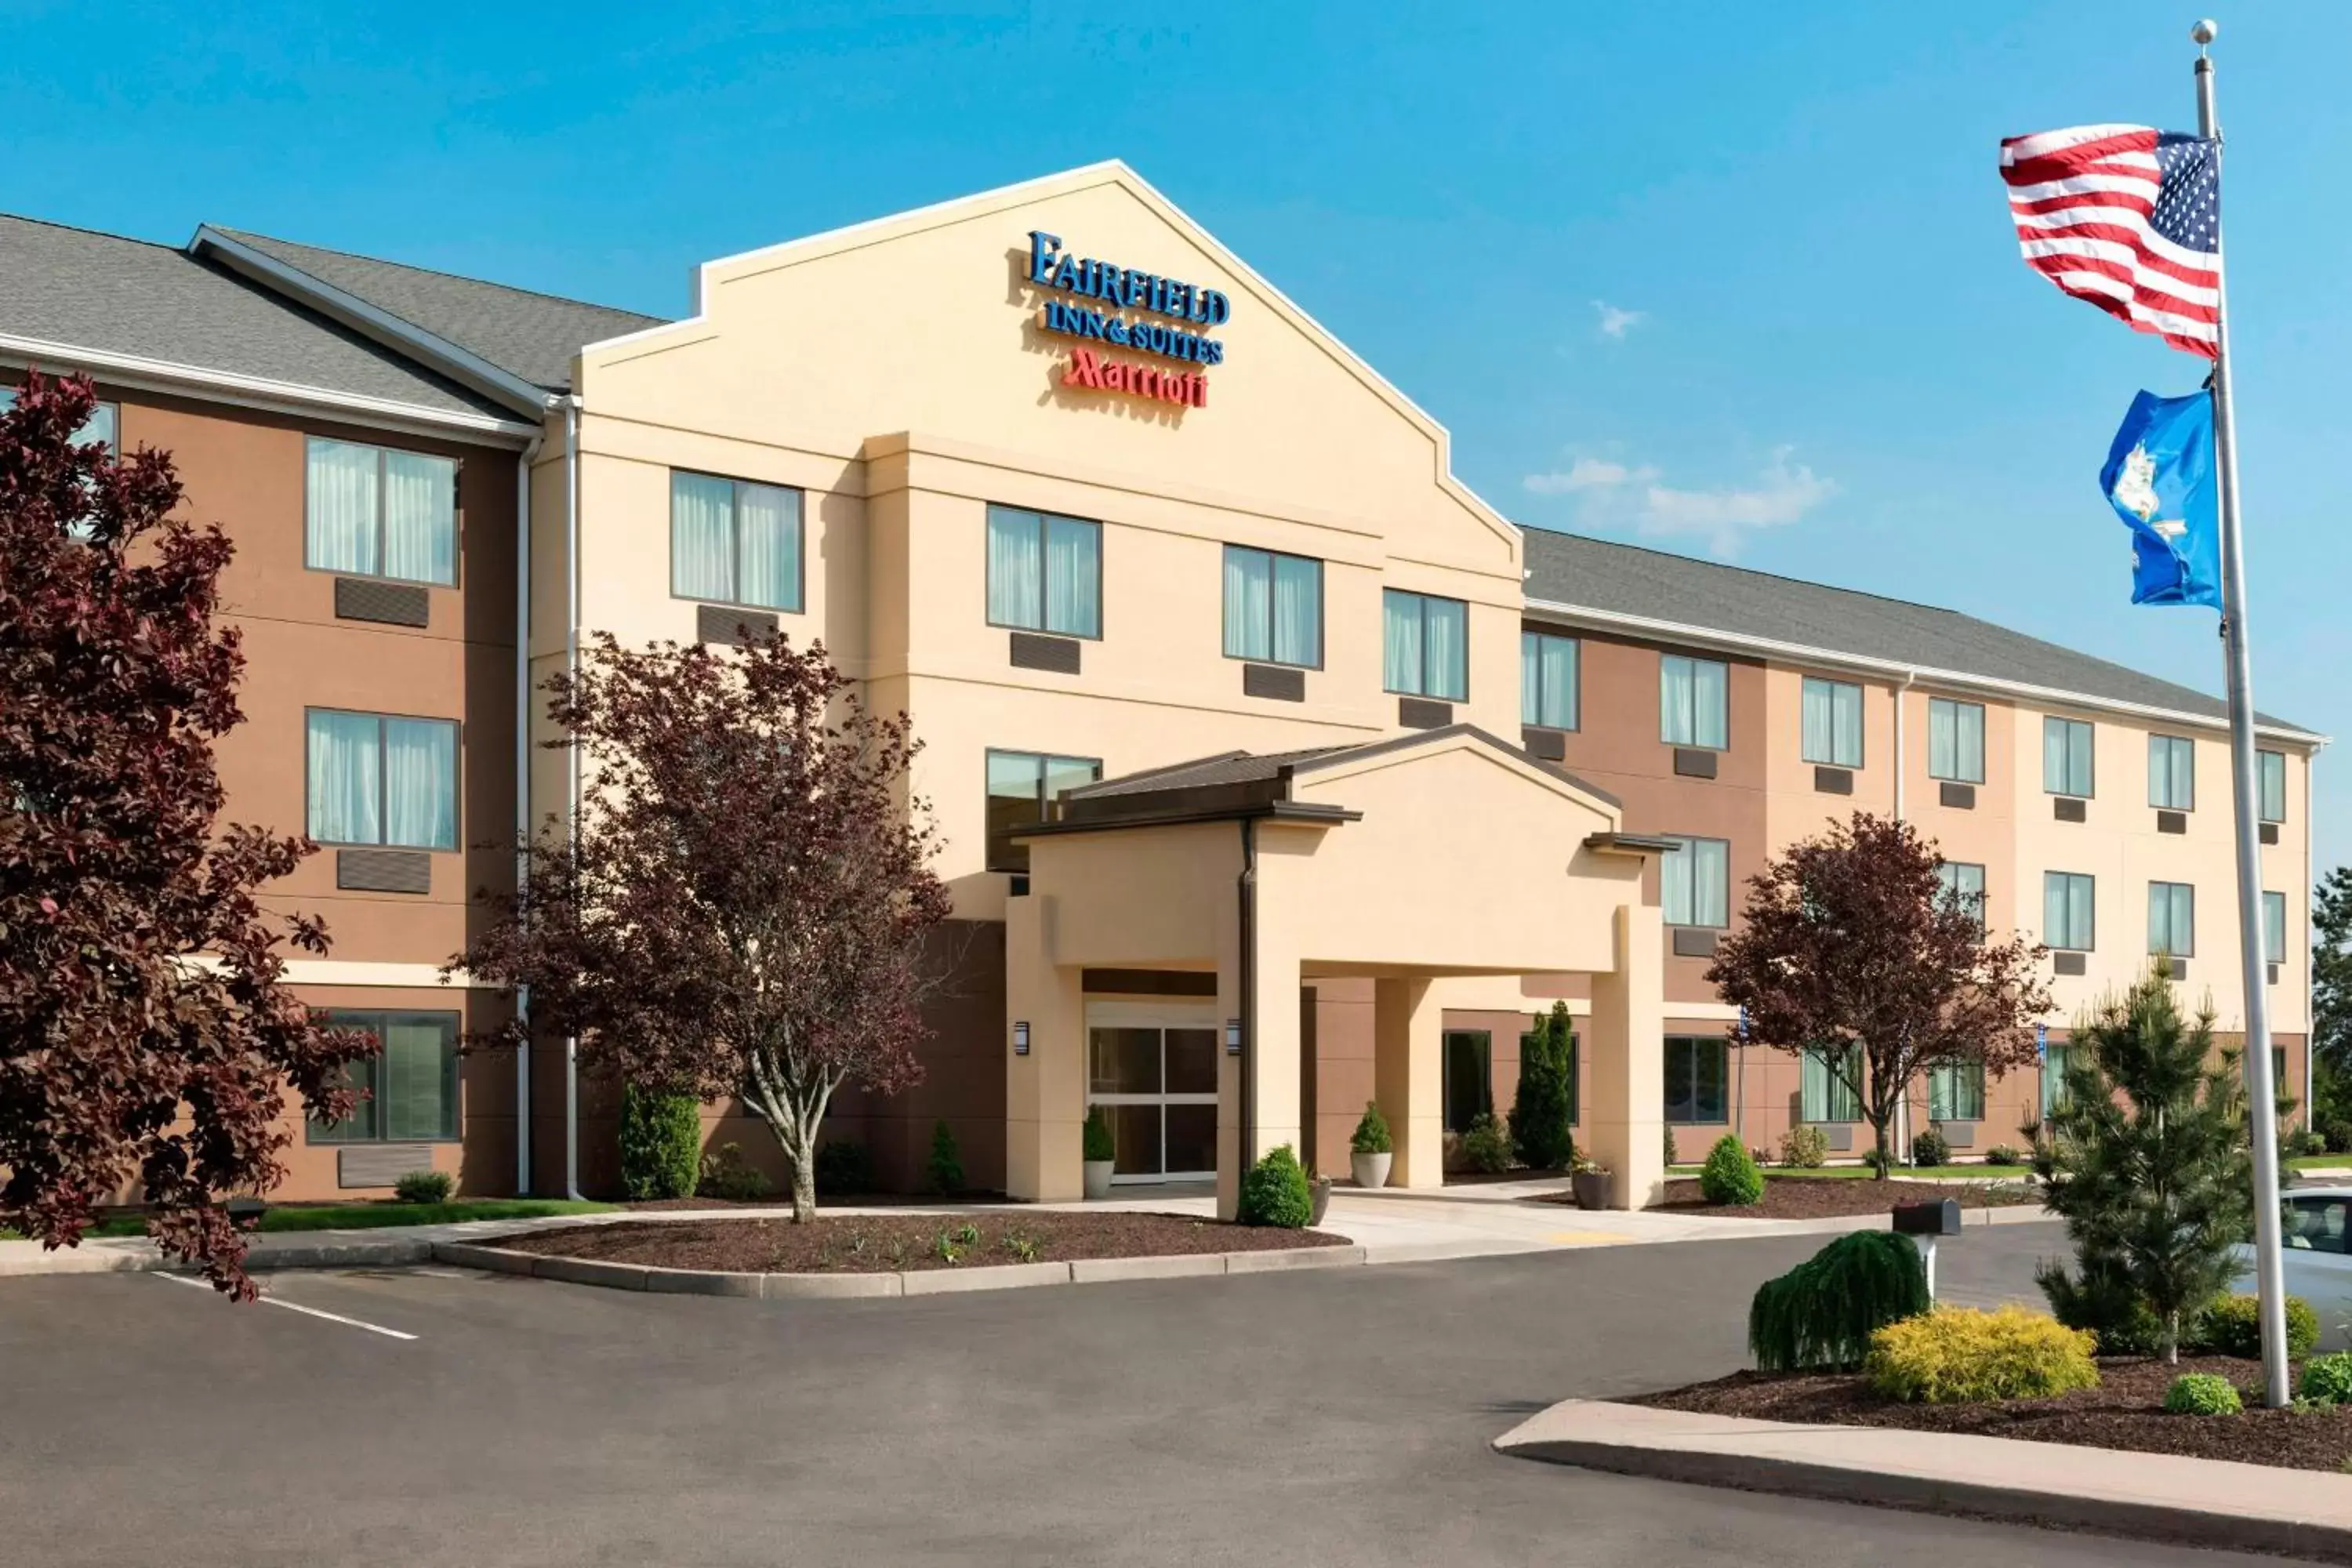 Property Building in Fairfield Inn & Suites Hartford Manchester